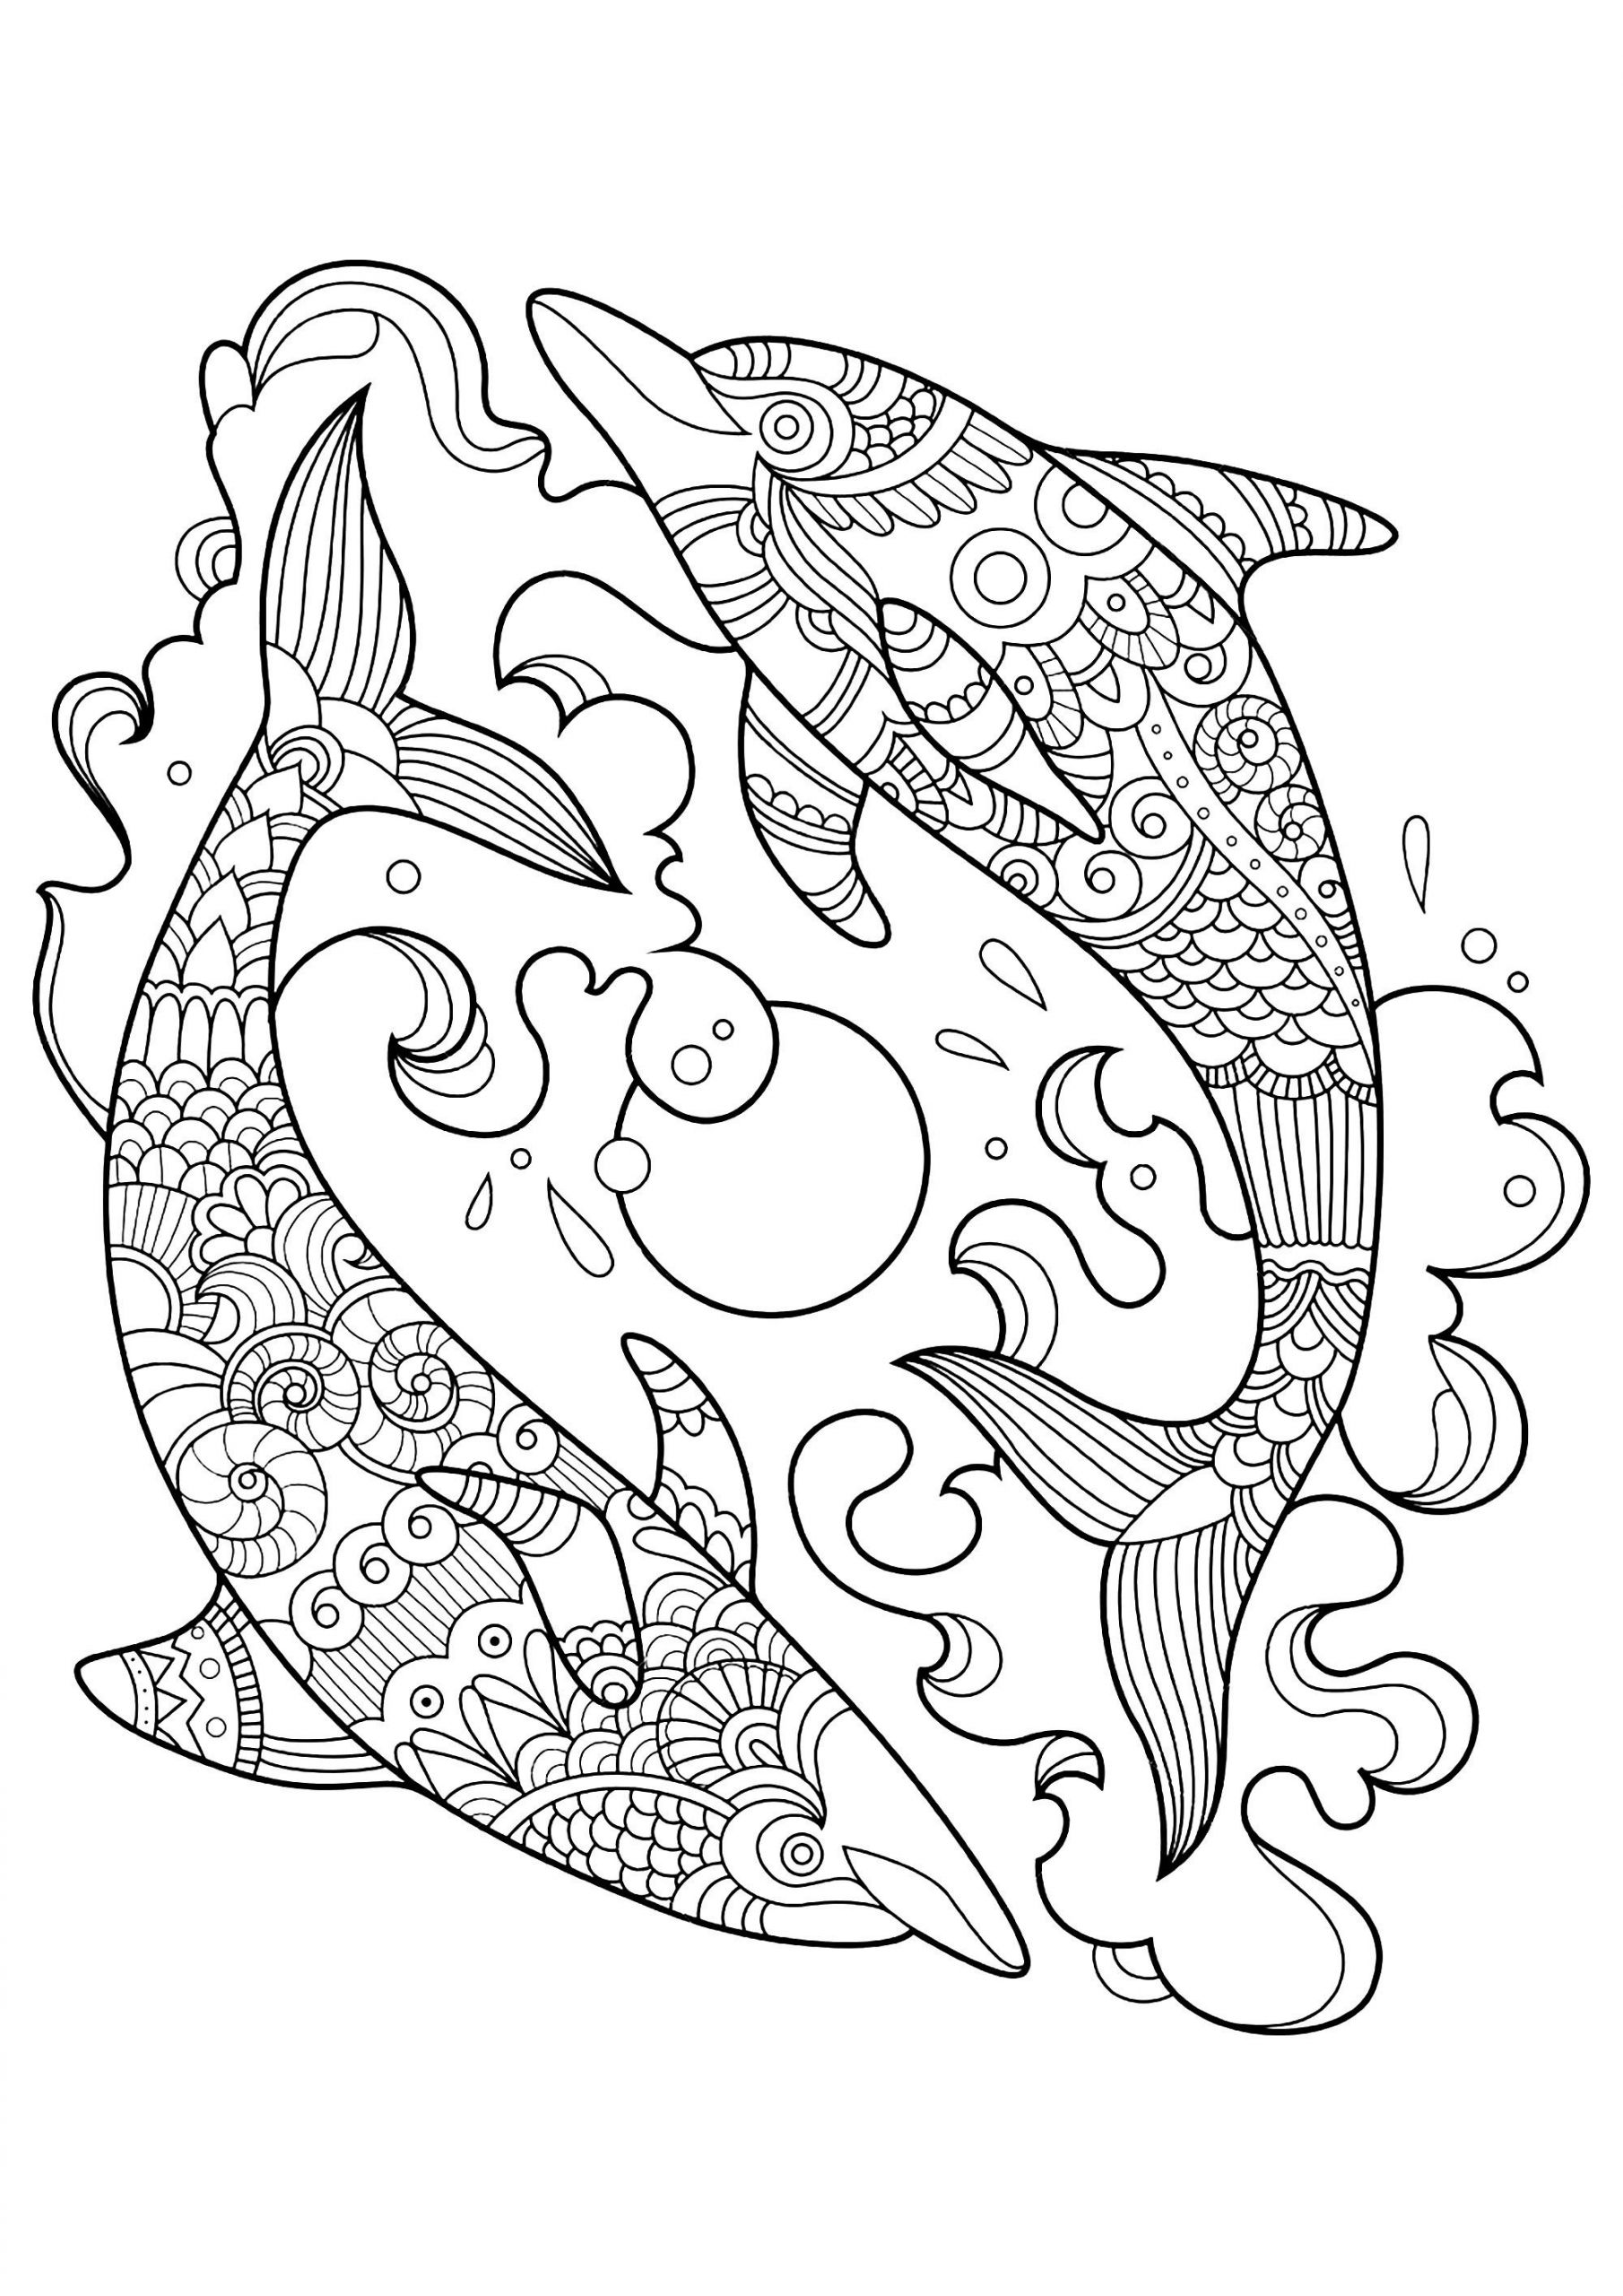 Dolphin Coloring Pages Printable
 Dolphins to color for children Dolphins Kids Coloring Pages